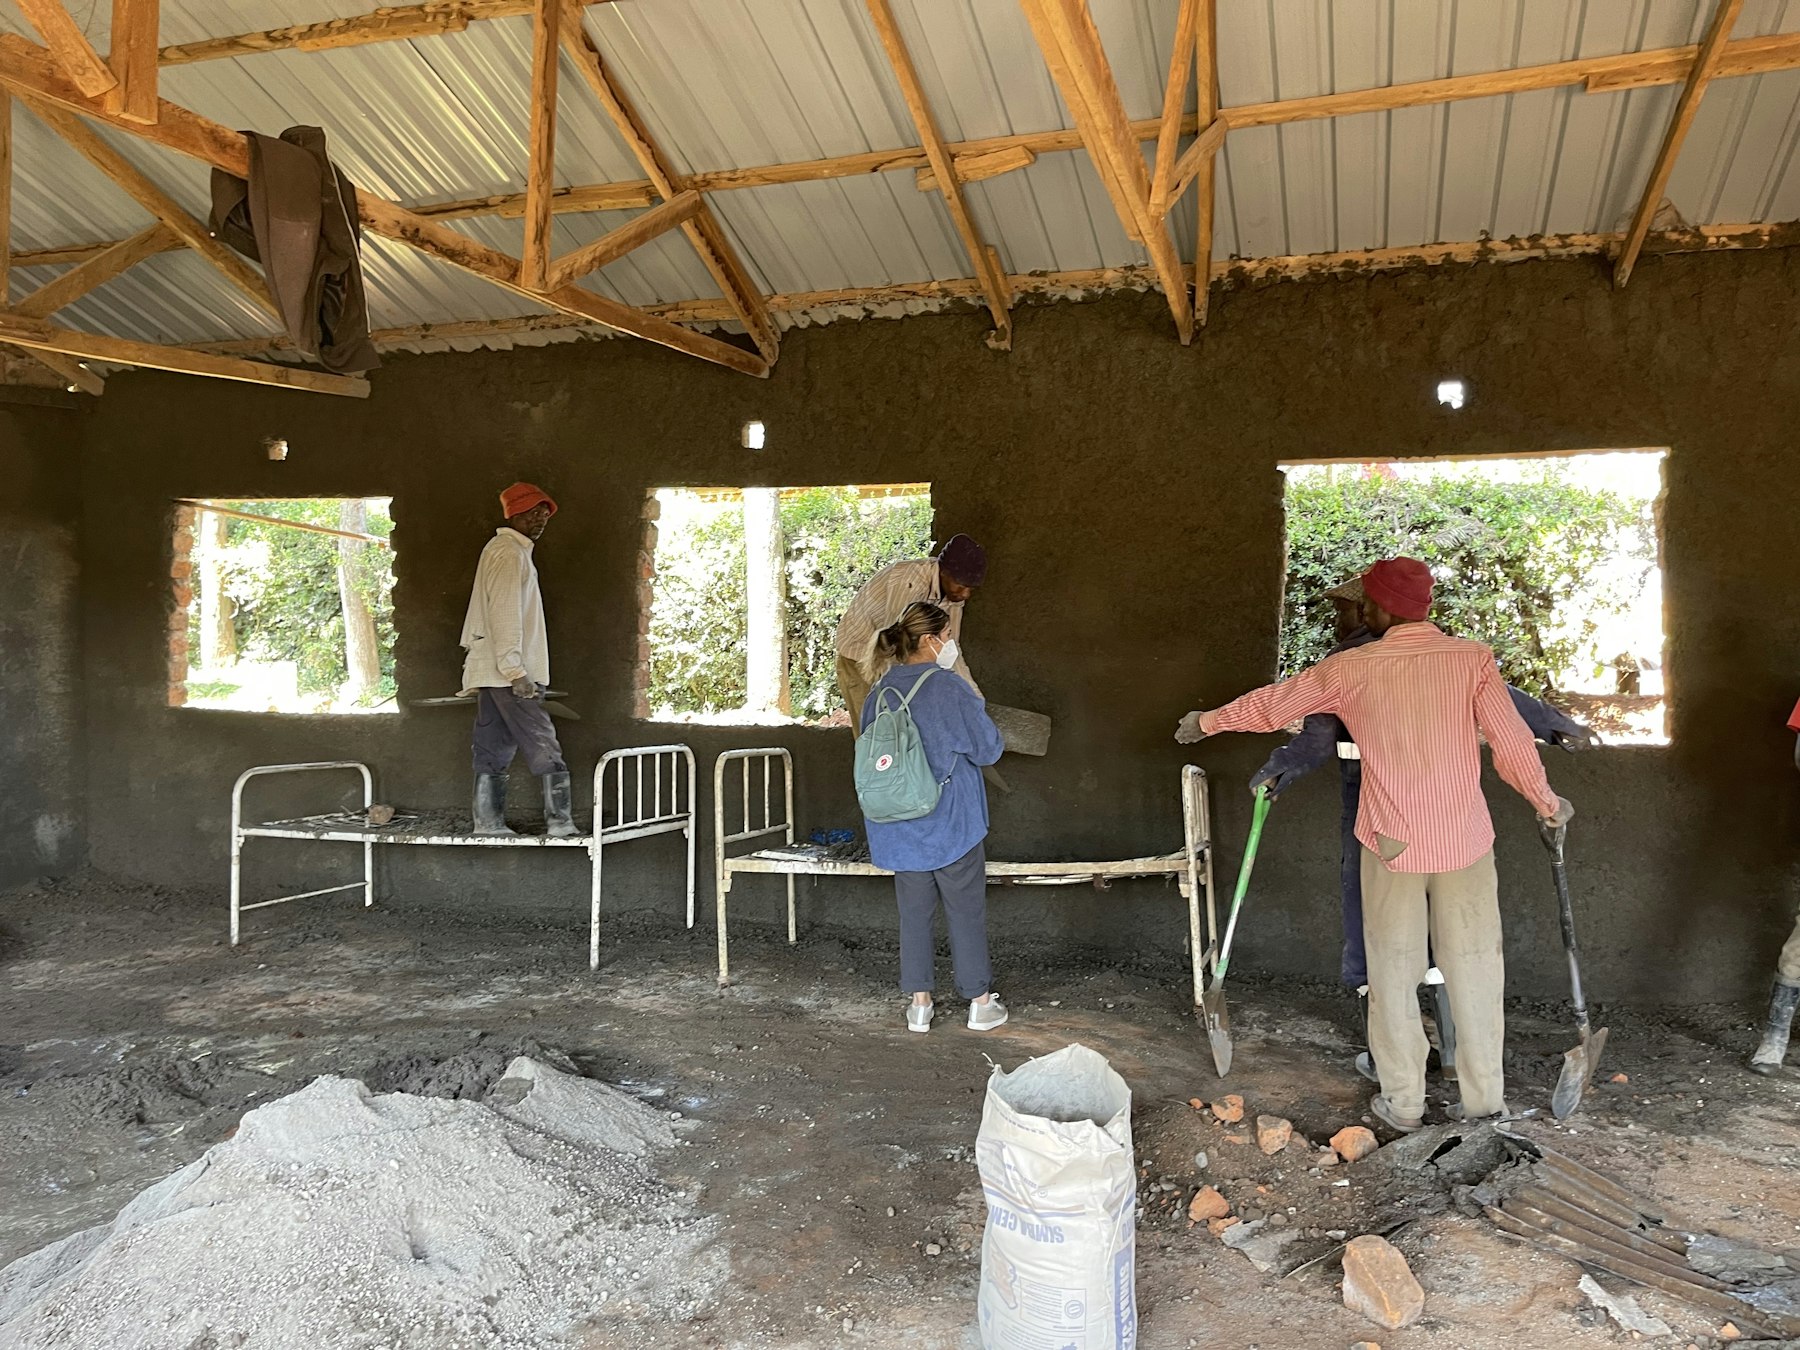 Jenna Mulji and colleagues visited Gesusu Sub-County Hospital to assess the renovations, as part of the EC COVID-19 Project.